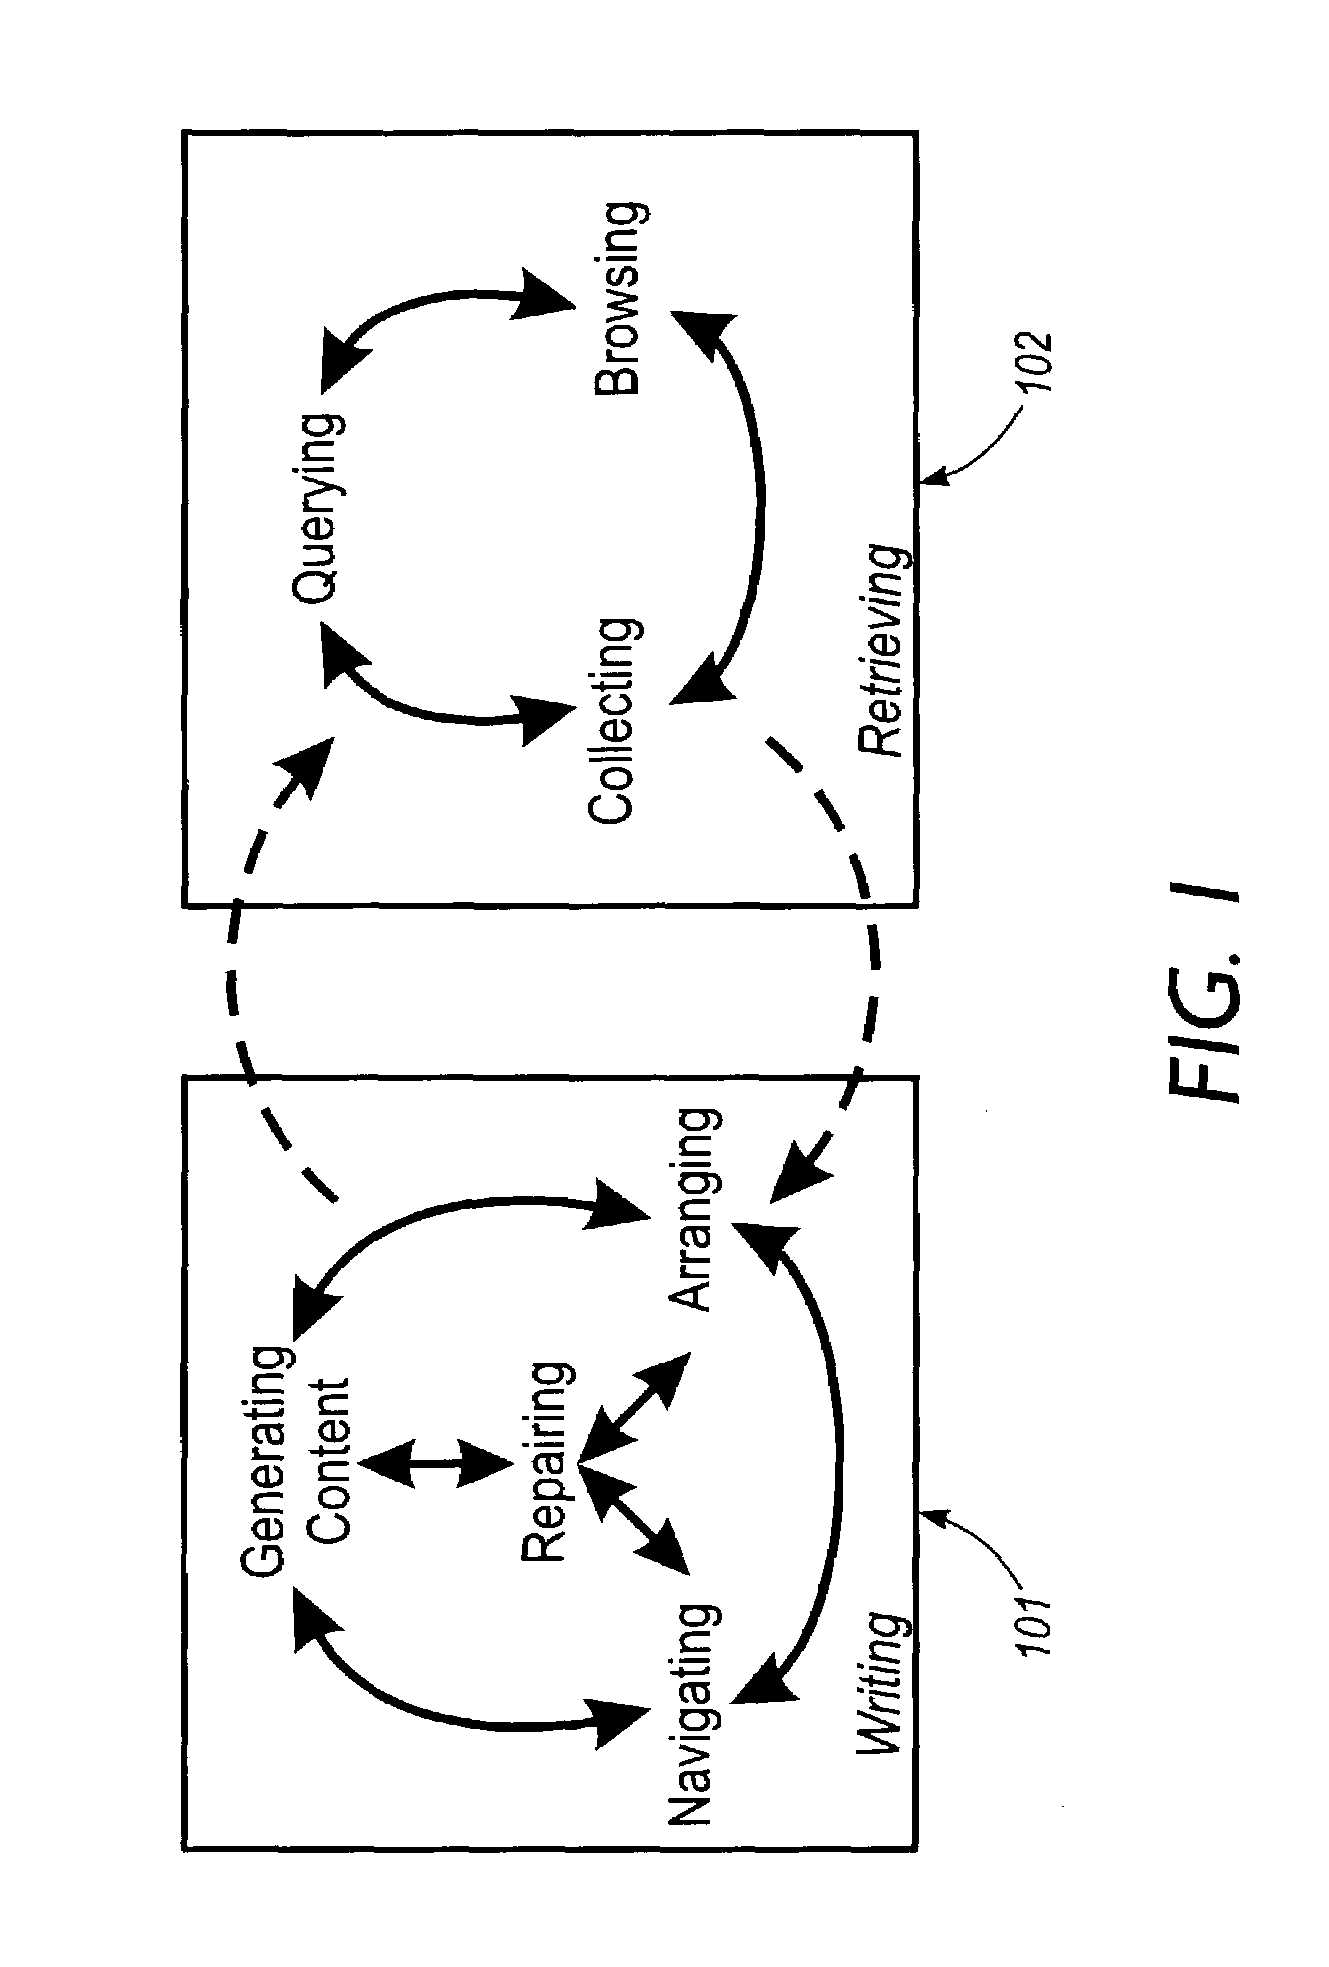 System and method for moving graphical objects on a computer controlled system